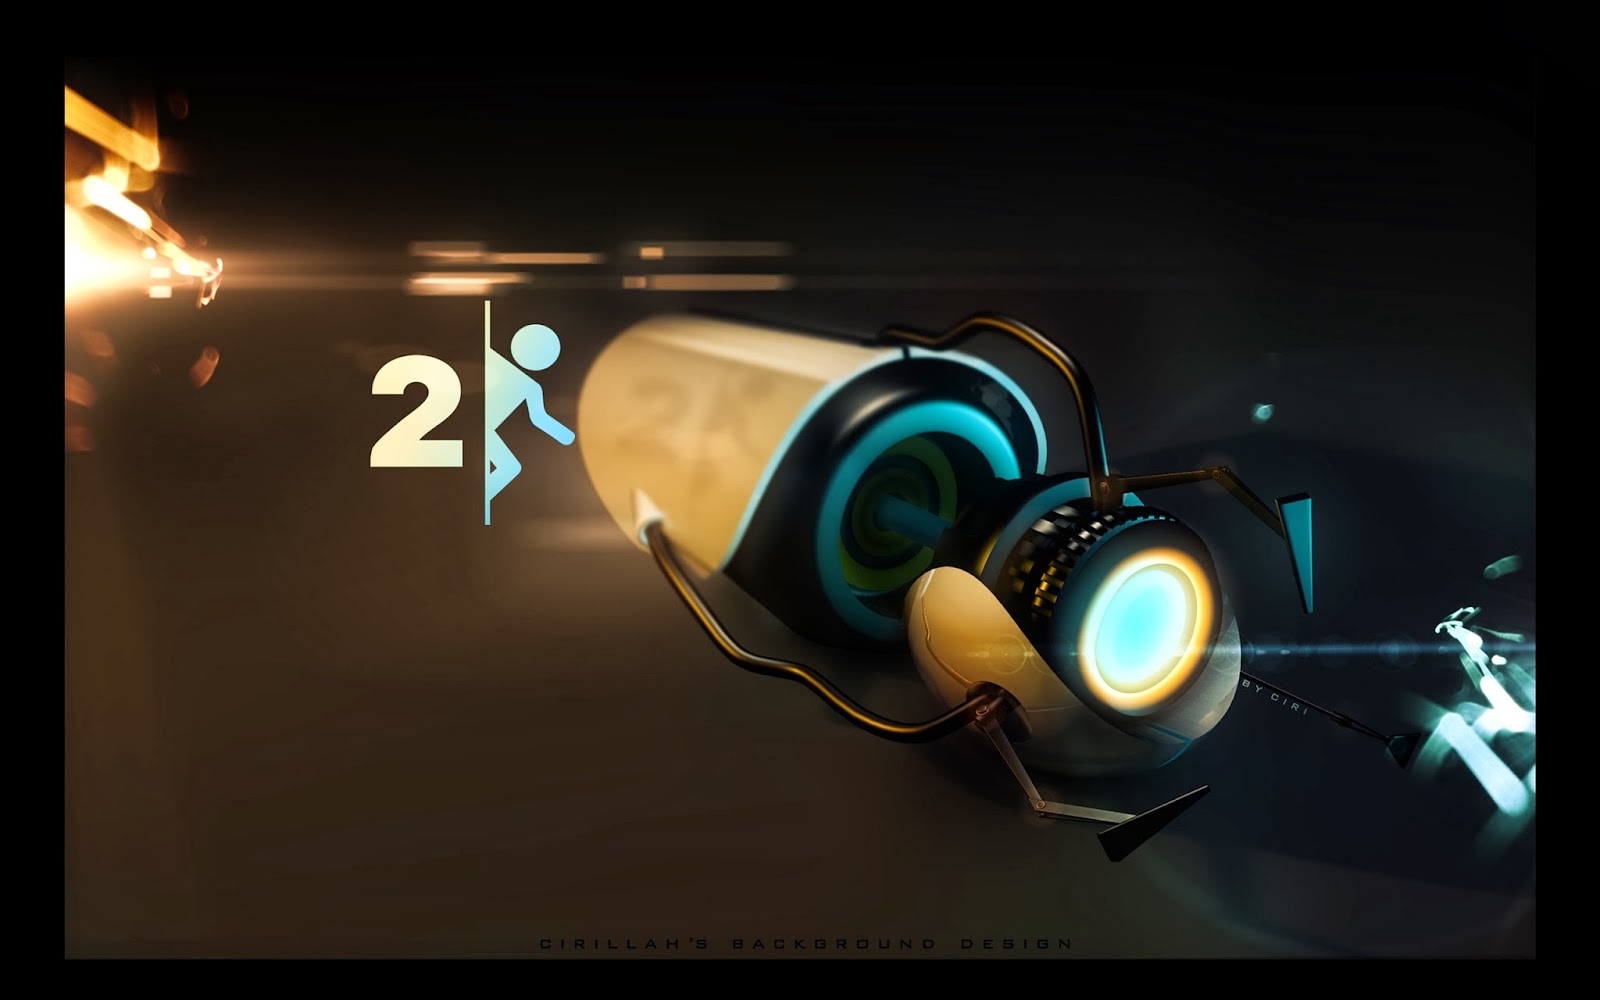 WallSheets Game Portal 2 Desktop Wallpapers and Backgrounds 1600x1000